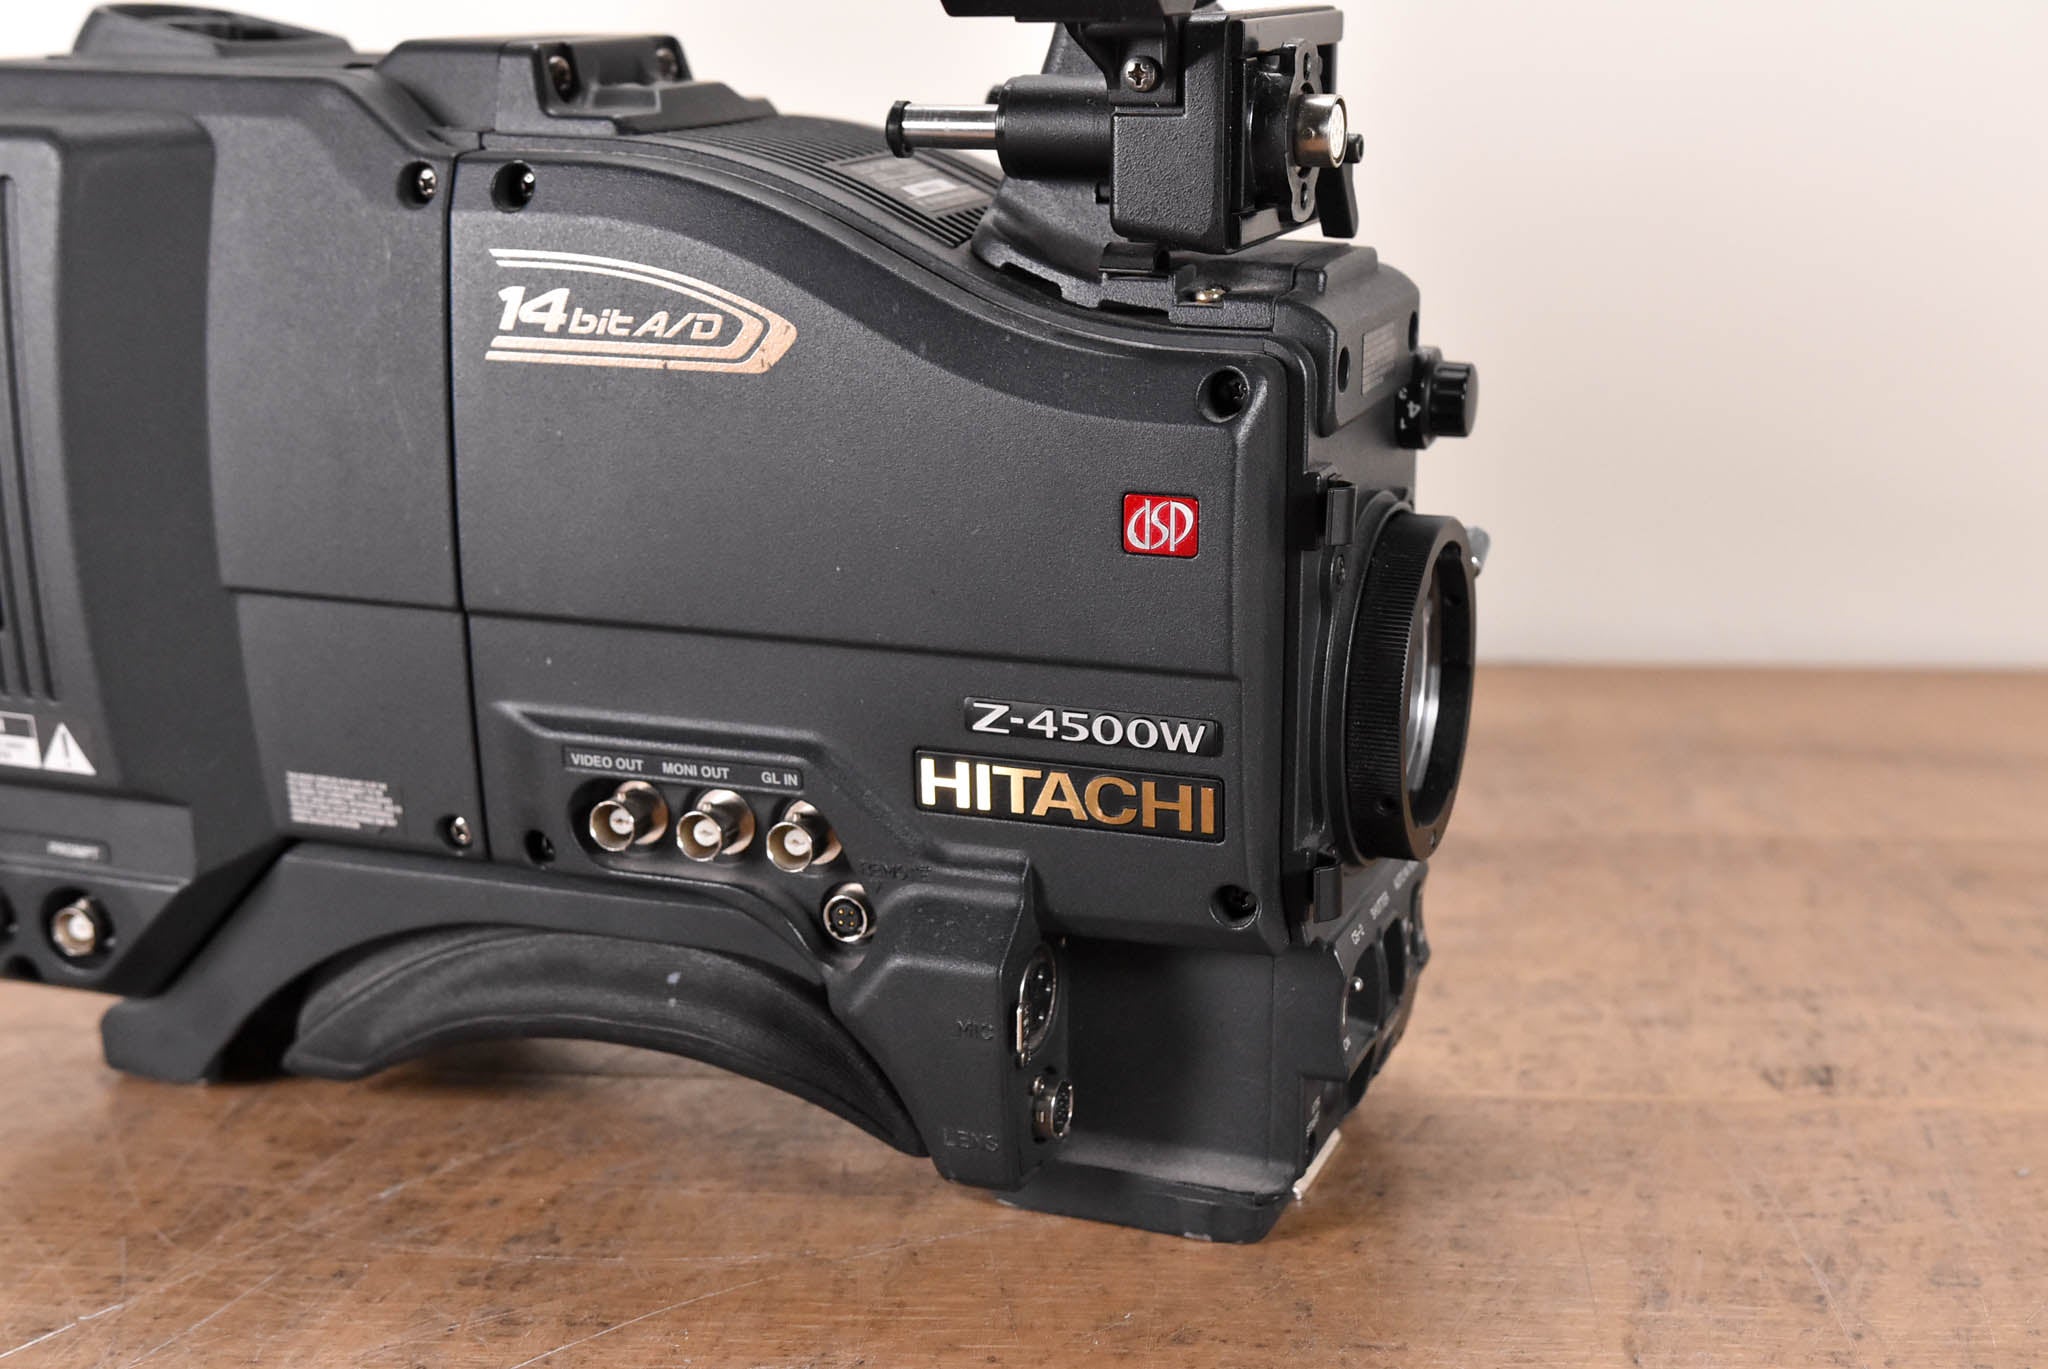 Hitachi Z-4500W 3-CCD Camcorder with CX-Z3A Triax Adapter